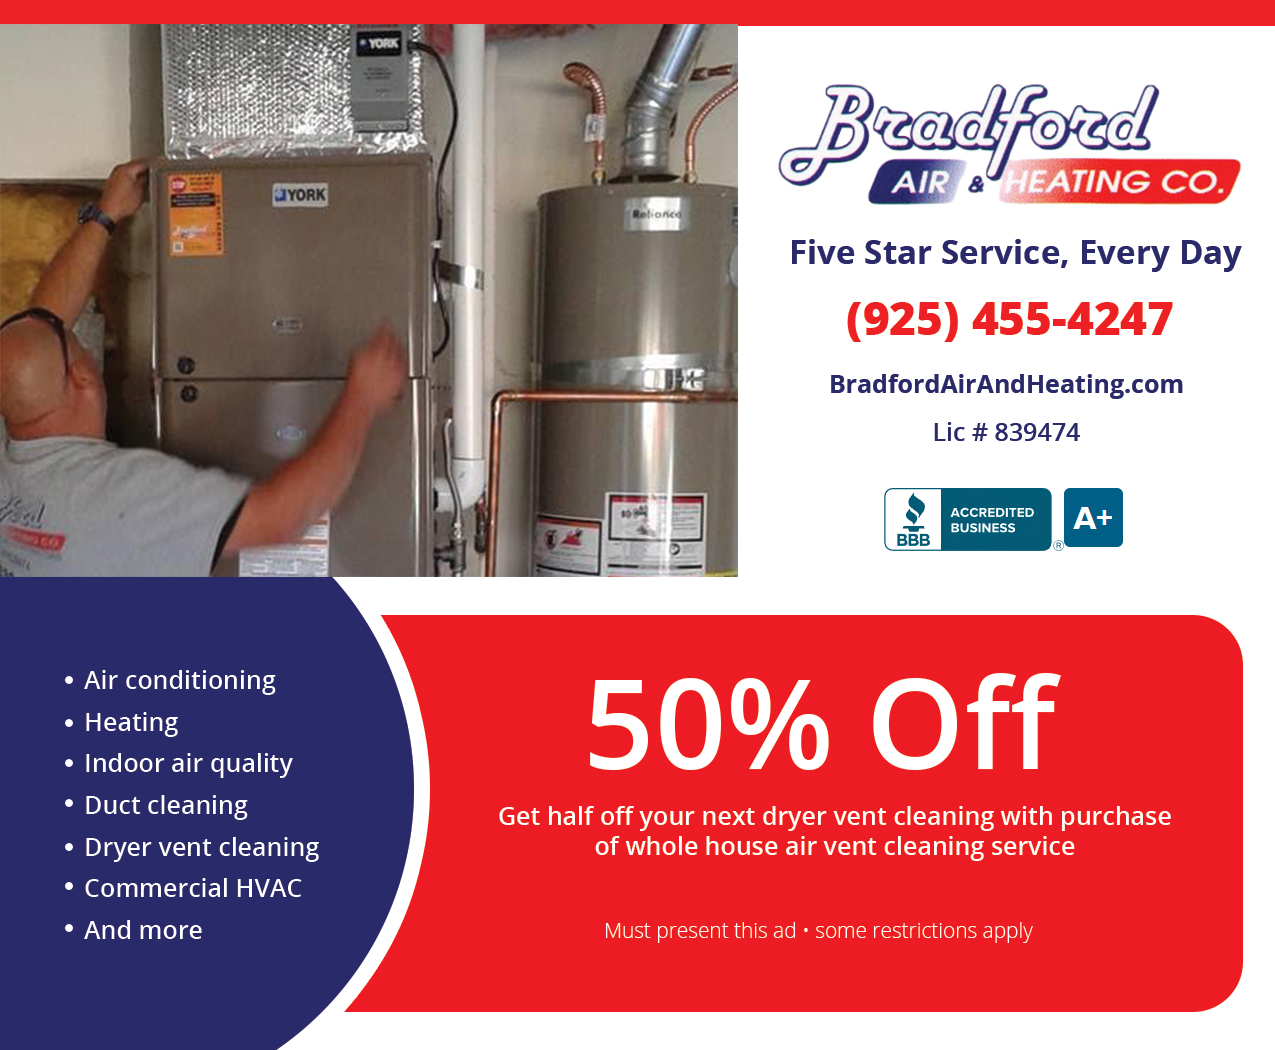 50% off your next dryer vent cleaning service with purchase of whole house air vent cleaning service